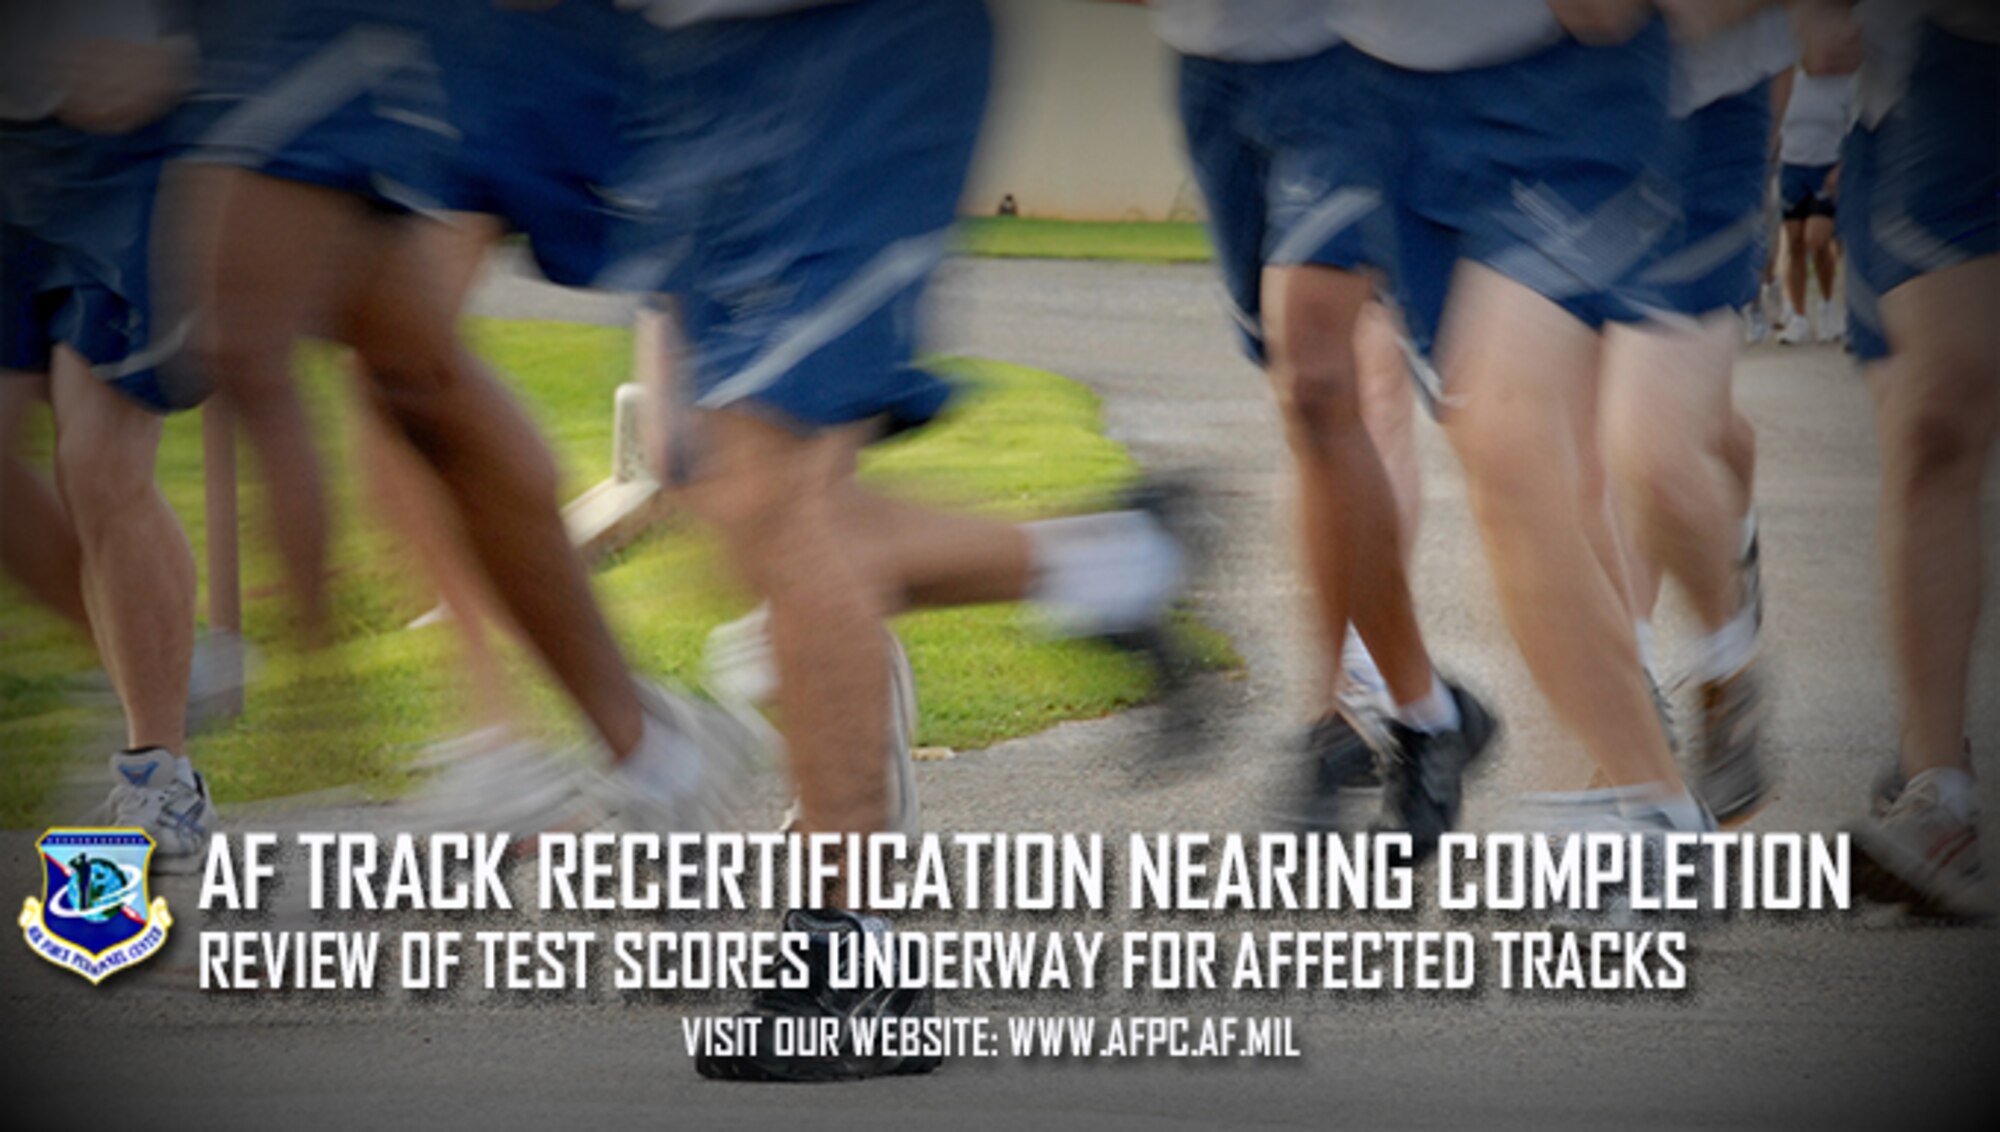 Airmen who tested on physical fitness assessments measuring short will retain their fitness score for the aerobic portion. An adjustment to the aerobic score will occur for Airman who tested on PFAs that were too long. Officials from all bases impacted are working with the Air Force Personnel Center to contact affected Airmen and provide avenues for remedy. (U.S. Air Force graphic by Rob Lyon)